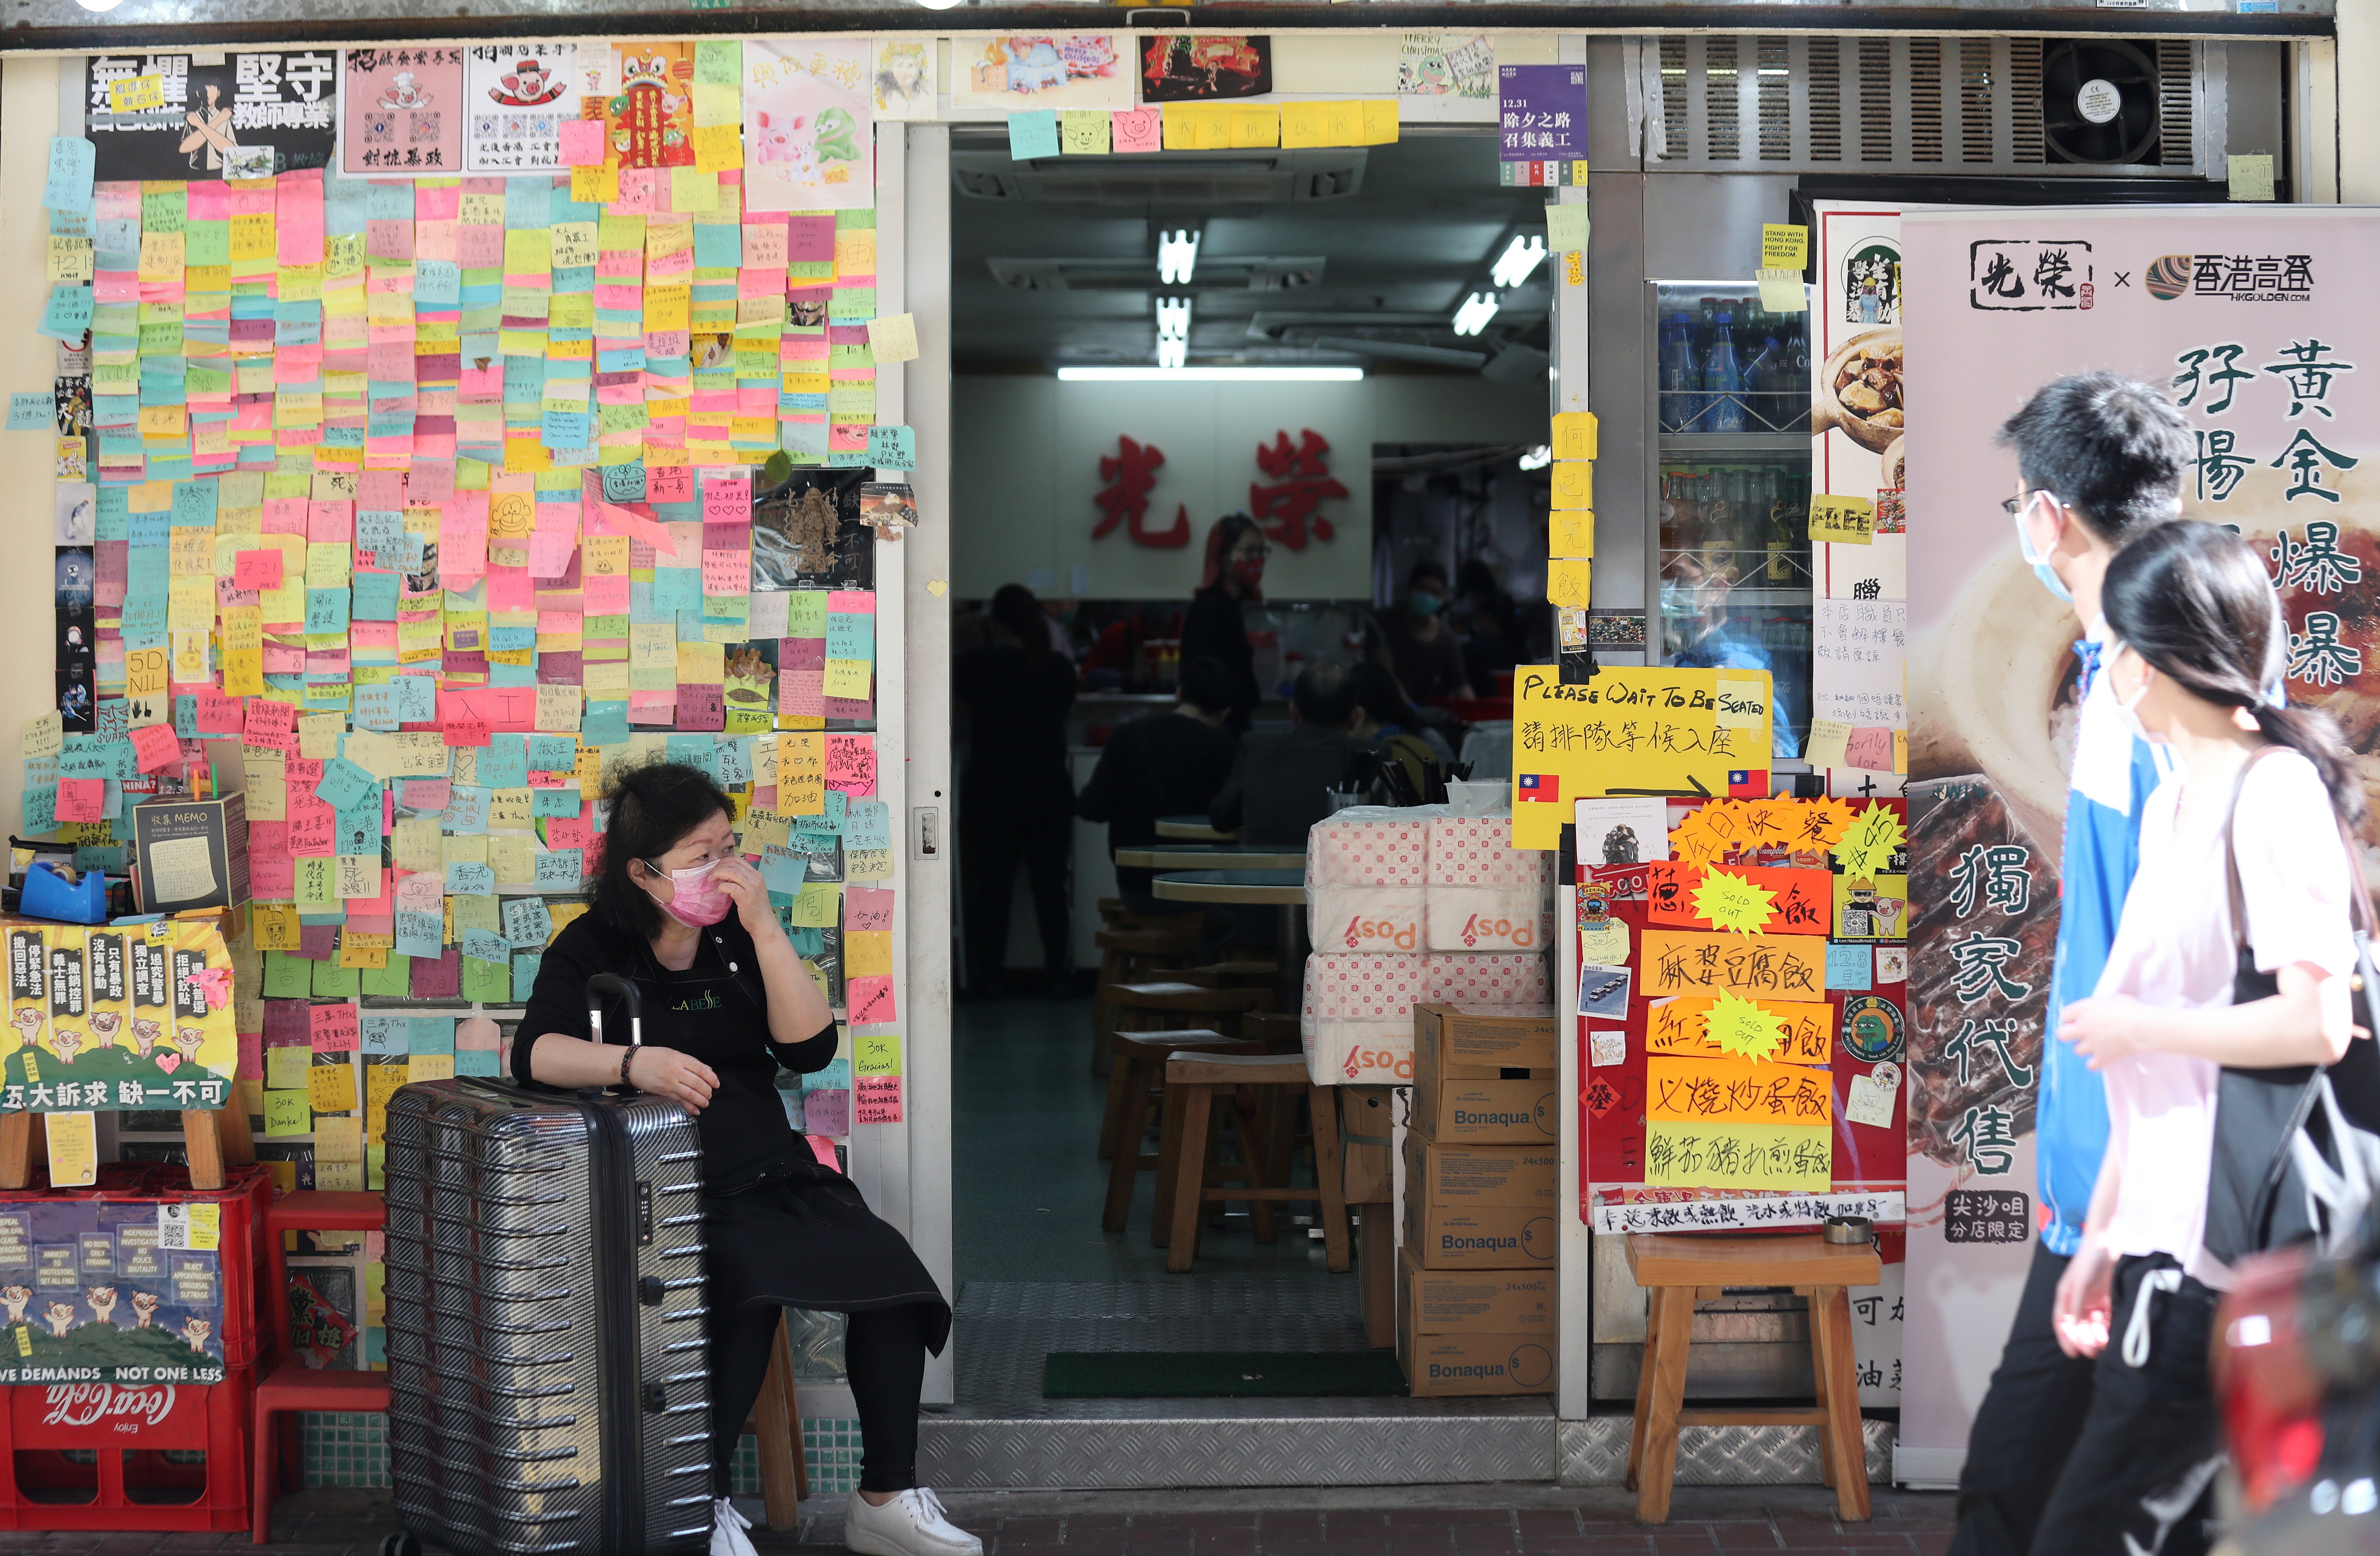 Kwong Wing Cafe in Tsim Sha Tsui, where a sign says staff only speak Cantonese. Photo: Xiaomei Chen